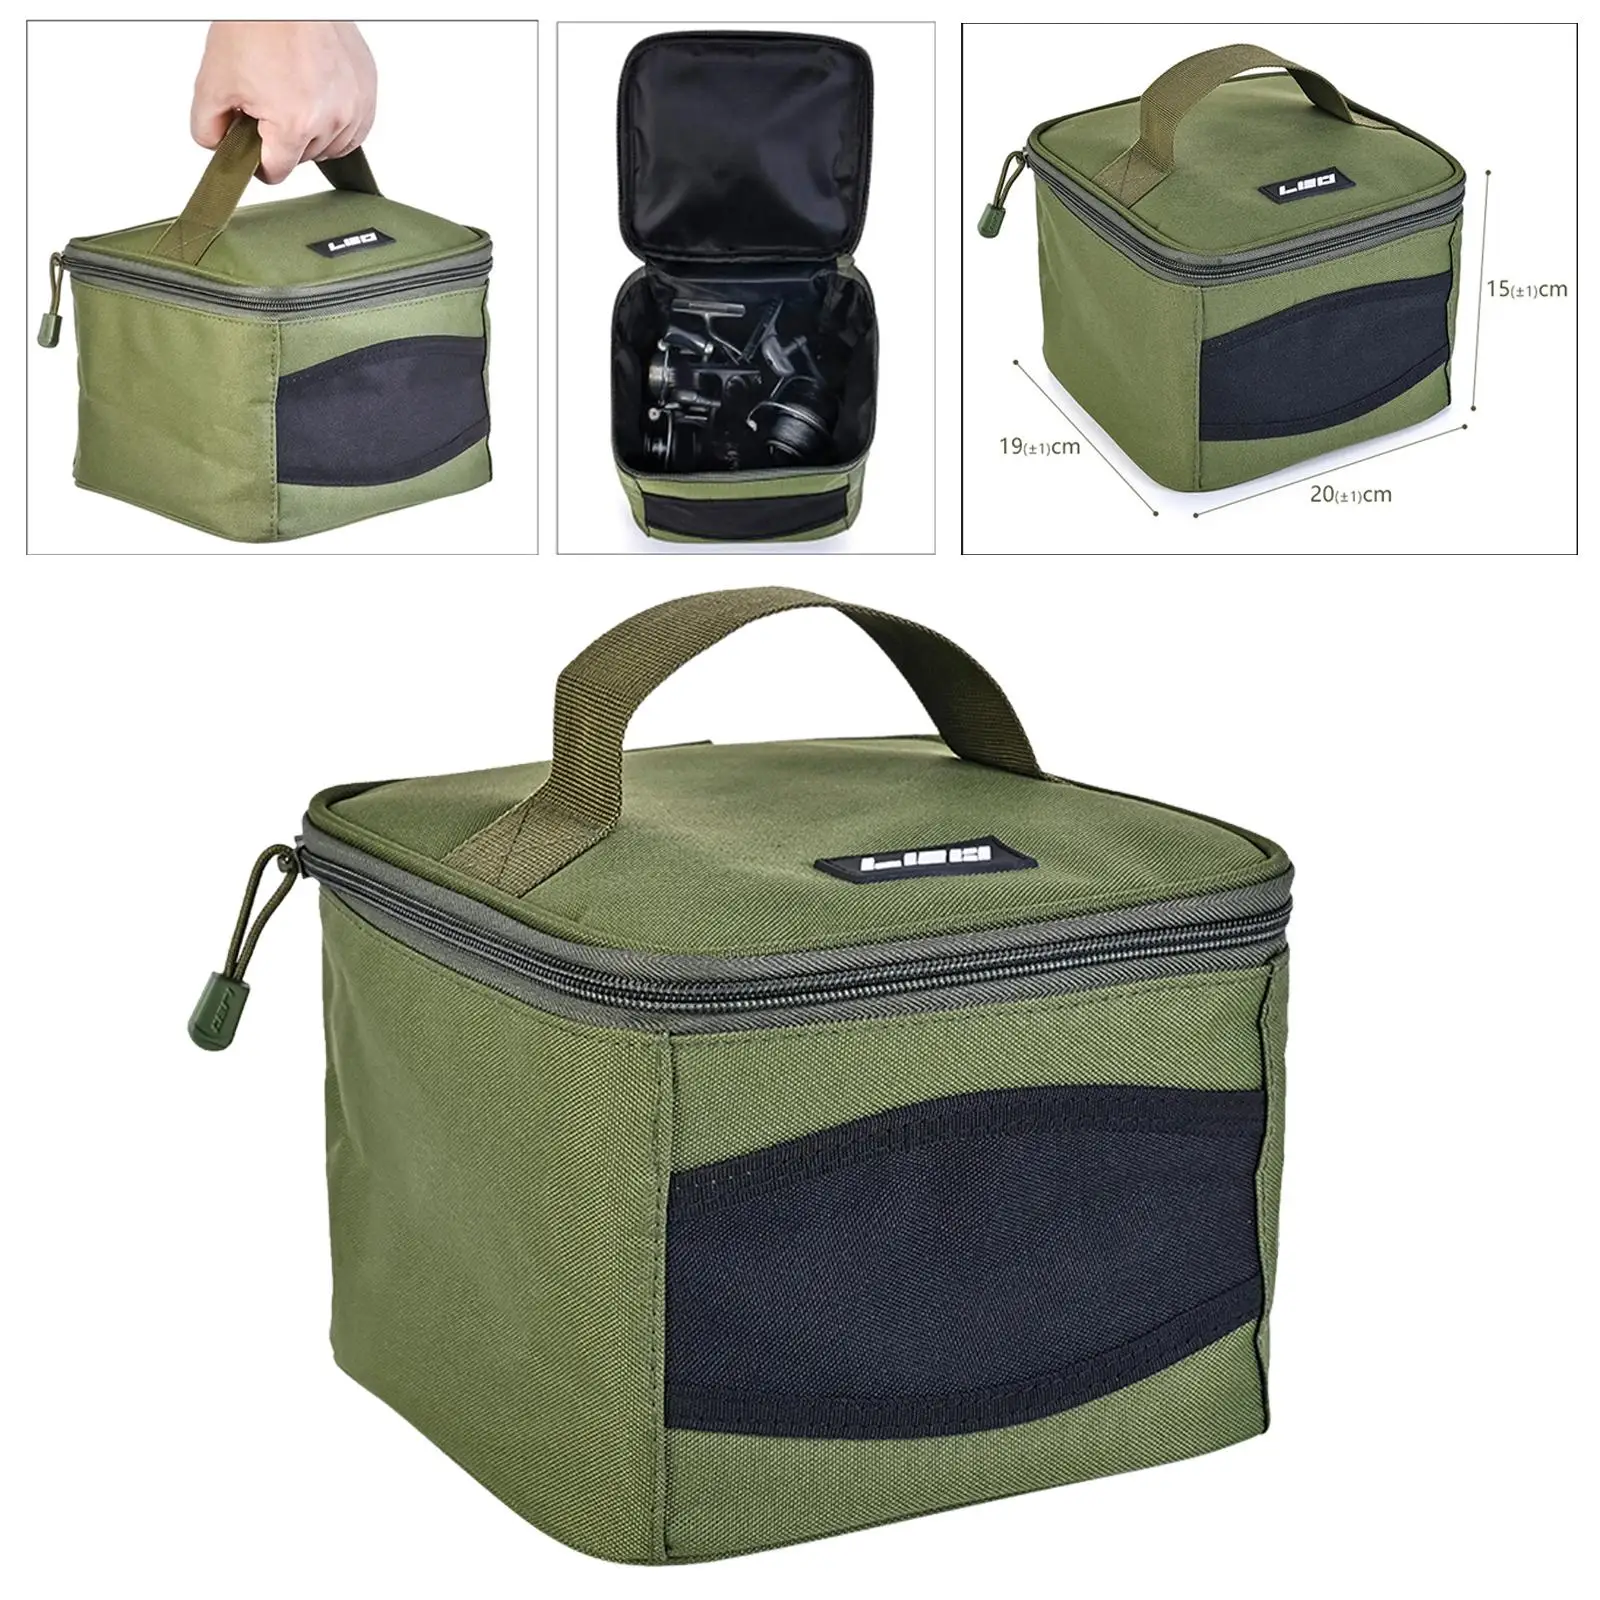 Multifunctional Fishing Reel Storage Bag Dust Proof Durable Protective Case Oxford Fishing Tackle Pack for Camping Hiking